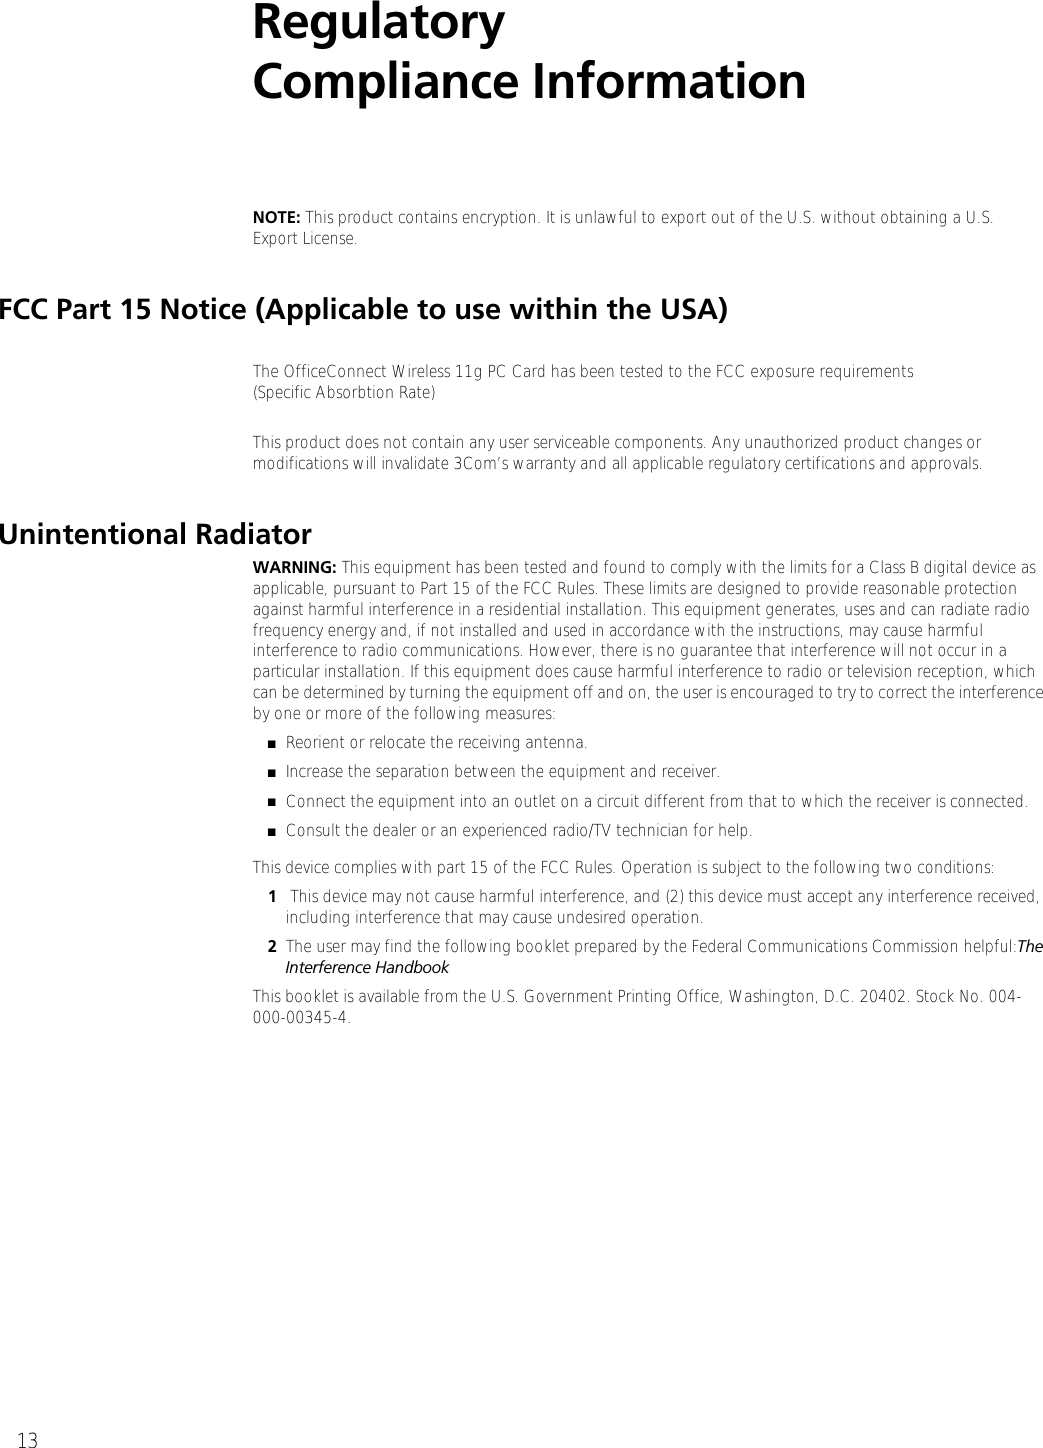 13Regulatory Compliance InformationNOTE: This product contains encryption. It is unlawful to export out of the U.S. without obtaining a U.S. Export License.FCC Part 15 Notice (Applicable to use within the USA)The OfficeConnect Wireless 11g PC Card has been tested to the FCC exposure requirements(Specific Absorbtion Rate) This product does not contain any user serviceable components. Any unauthorized product changes or modifications will invalidate 3Com’s warranty and all applicable regulatory certifications and approvals.Unintentional RadiatorWARNING: This equipment has been tested and found to comply with the limits for a Class B digital device as applicable, pursuant to Part 15 of the FCC Rules. These limits are designed to provide reasonable protection against harmful interference in a residential installation. This equipment generates, uses and can radiate radio frequency energy and, if not installed and used in accordance with the instructions, may cause harmful interference to radio communications. However, there is no guarantee that interference will not occur in a particular installation. If this equipment does cause harmful interference to radio or television reception, which can be determined by turning the equipment off and on, the user is encouraged to try to correct the interference by one or more of the following measures:■Reorient or relocate the receiving antenna.■Increase the separation between the equipment and receiver.■Connect the equipment into an outlet on a circuit different from that to which the receiver is connected.■Consult the dealer or an experienced radio/TV technician for help.This device complies with part 15 of the FCC Rules. Operation is subject to the following two conditions: 1 This device may not cause harmful interference, and (2) this device must accept any interference received, including interference that may cause undesired operation.2The user may find the following booklet prepared by the Federal Communications Commission helpful:The Interference HandbookThis booklet is available from the U.S. Government Printing Office, Washington, D.C. 20402. Stock No. 004-000-00345-4. 